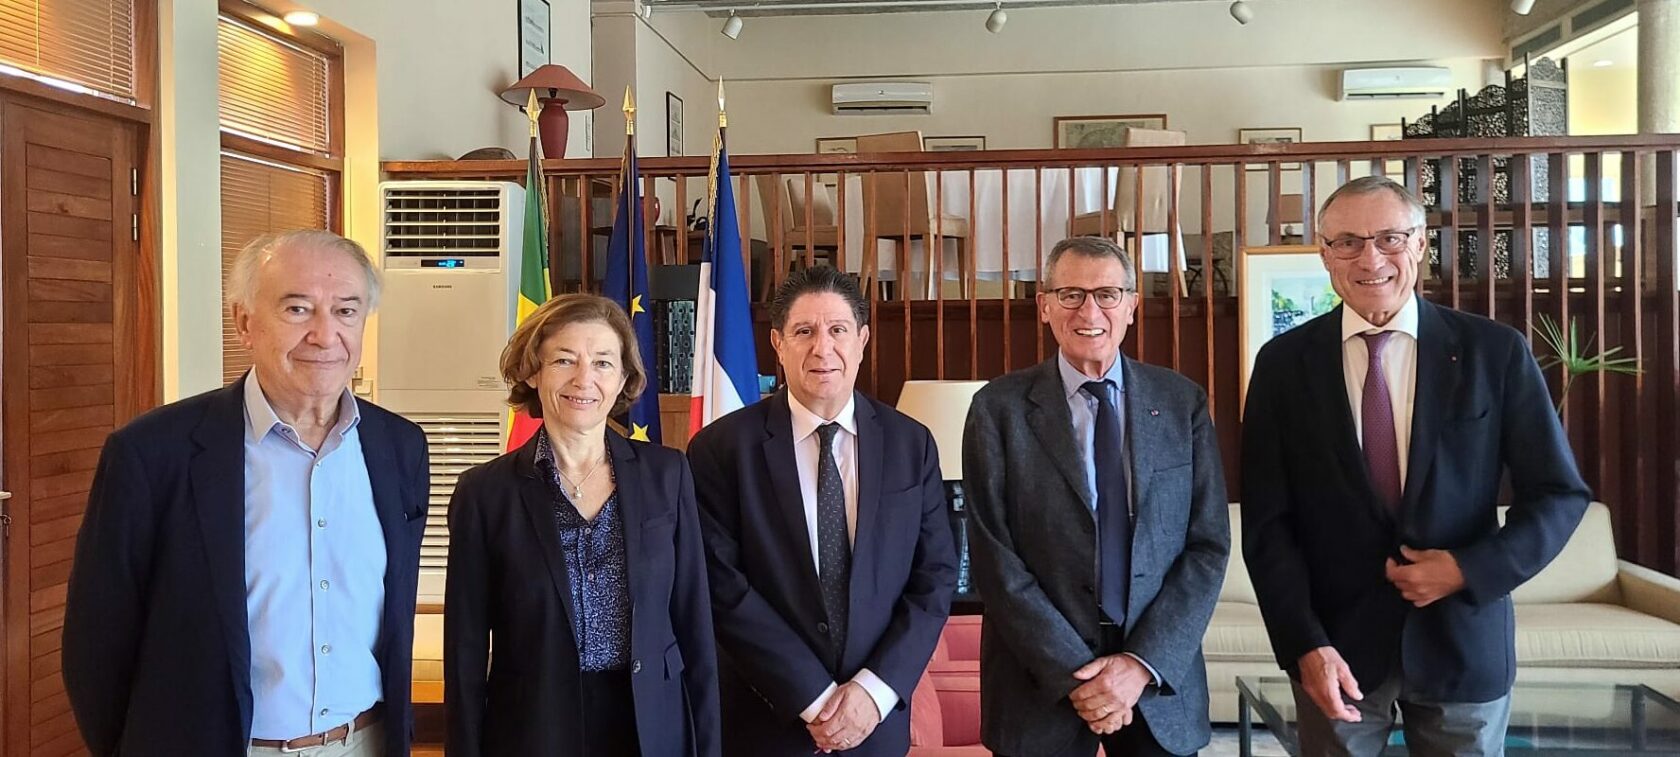 Jean-Cyril Spinetta, Florence Parly, Jean-Marie Bockel, Philippe Calavia et Marc Vizy